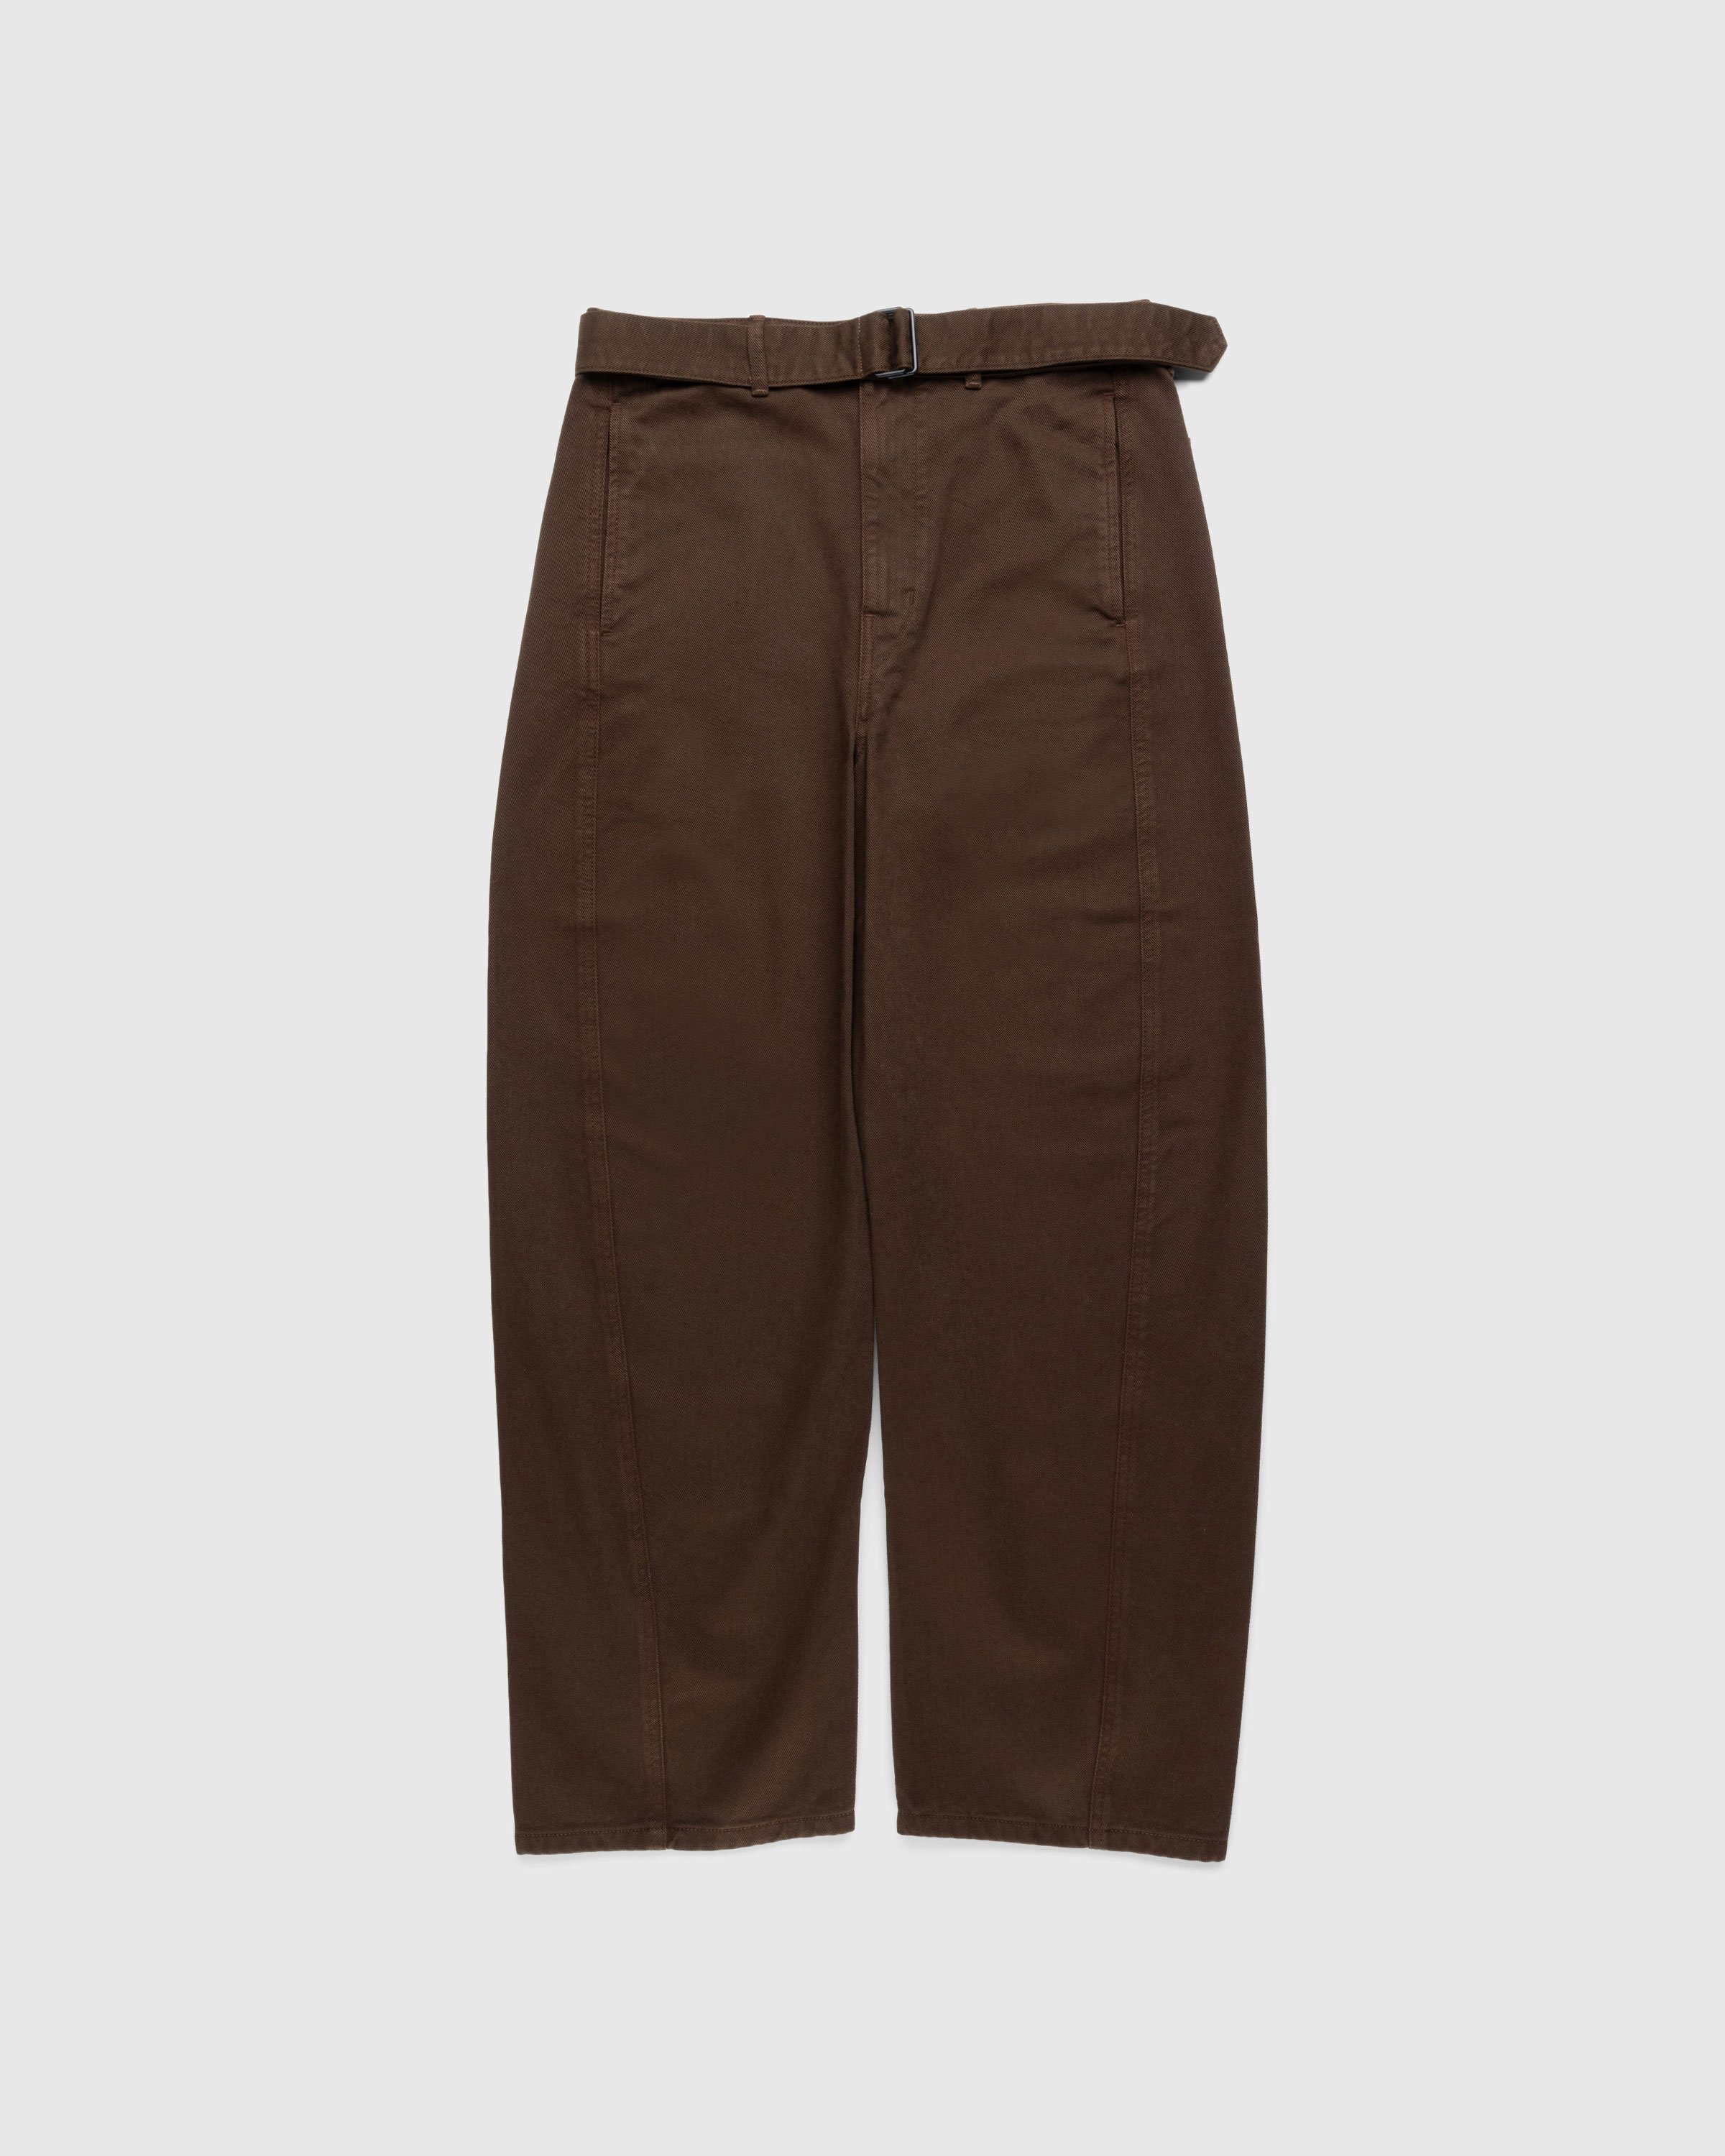 Lemaire - TWISTED BELTED CASUAL PANT - Clothing - Brown - Image 1